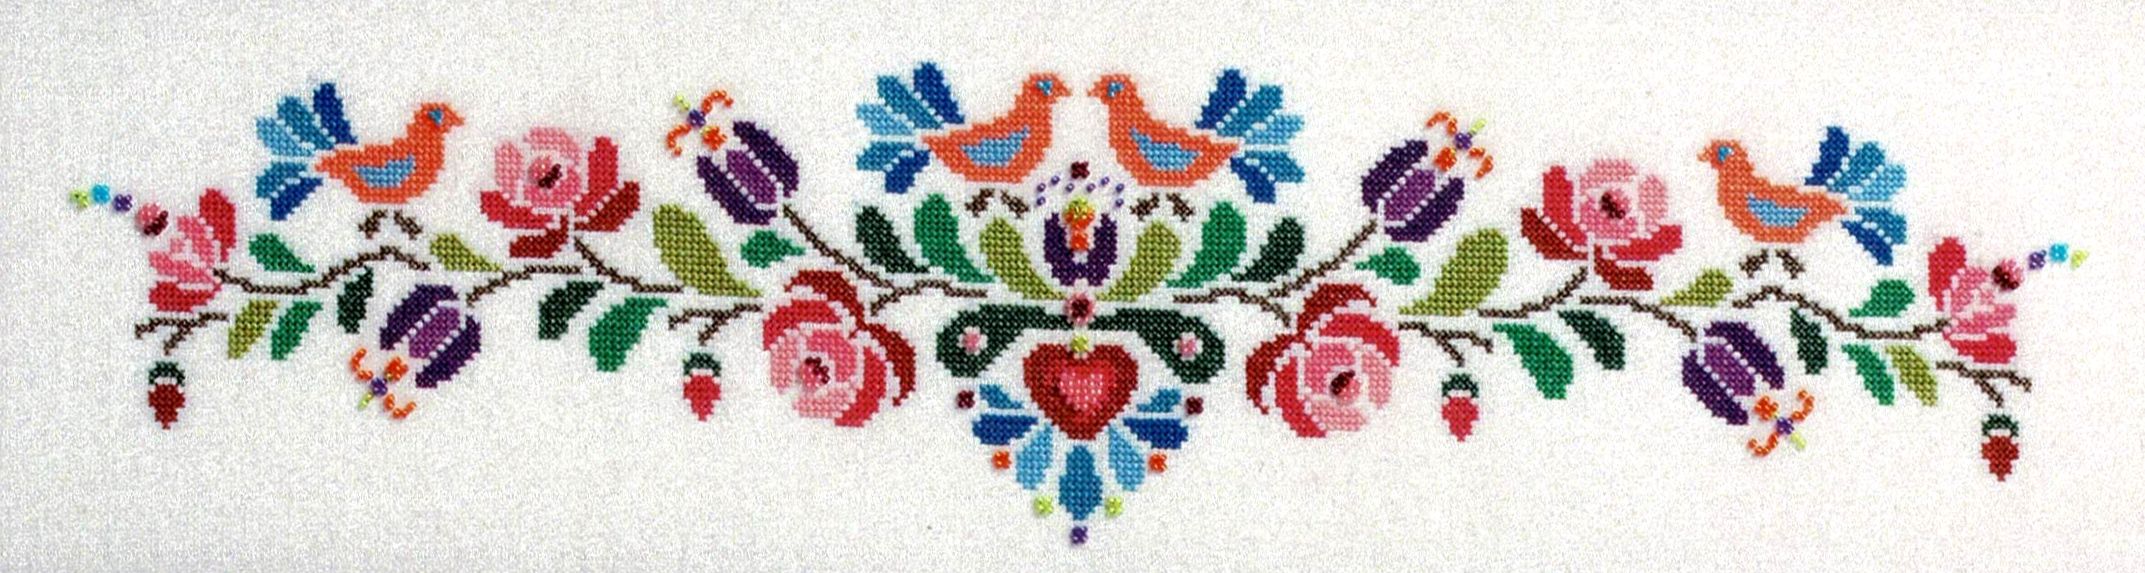 Hungarian Folk Art No. 3 Sulky Thread Pack by Glendon Place